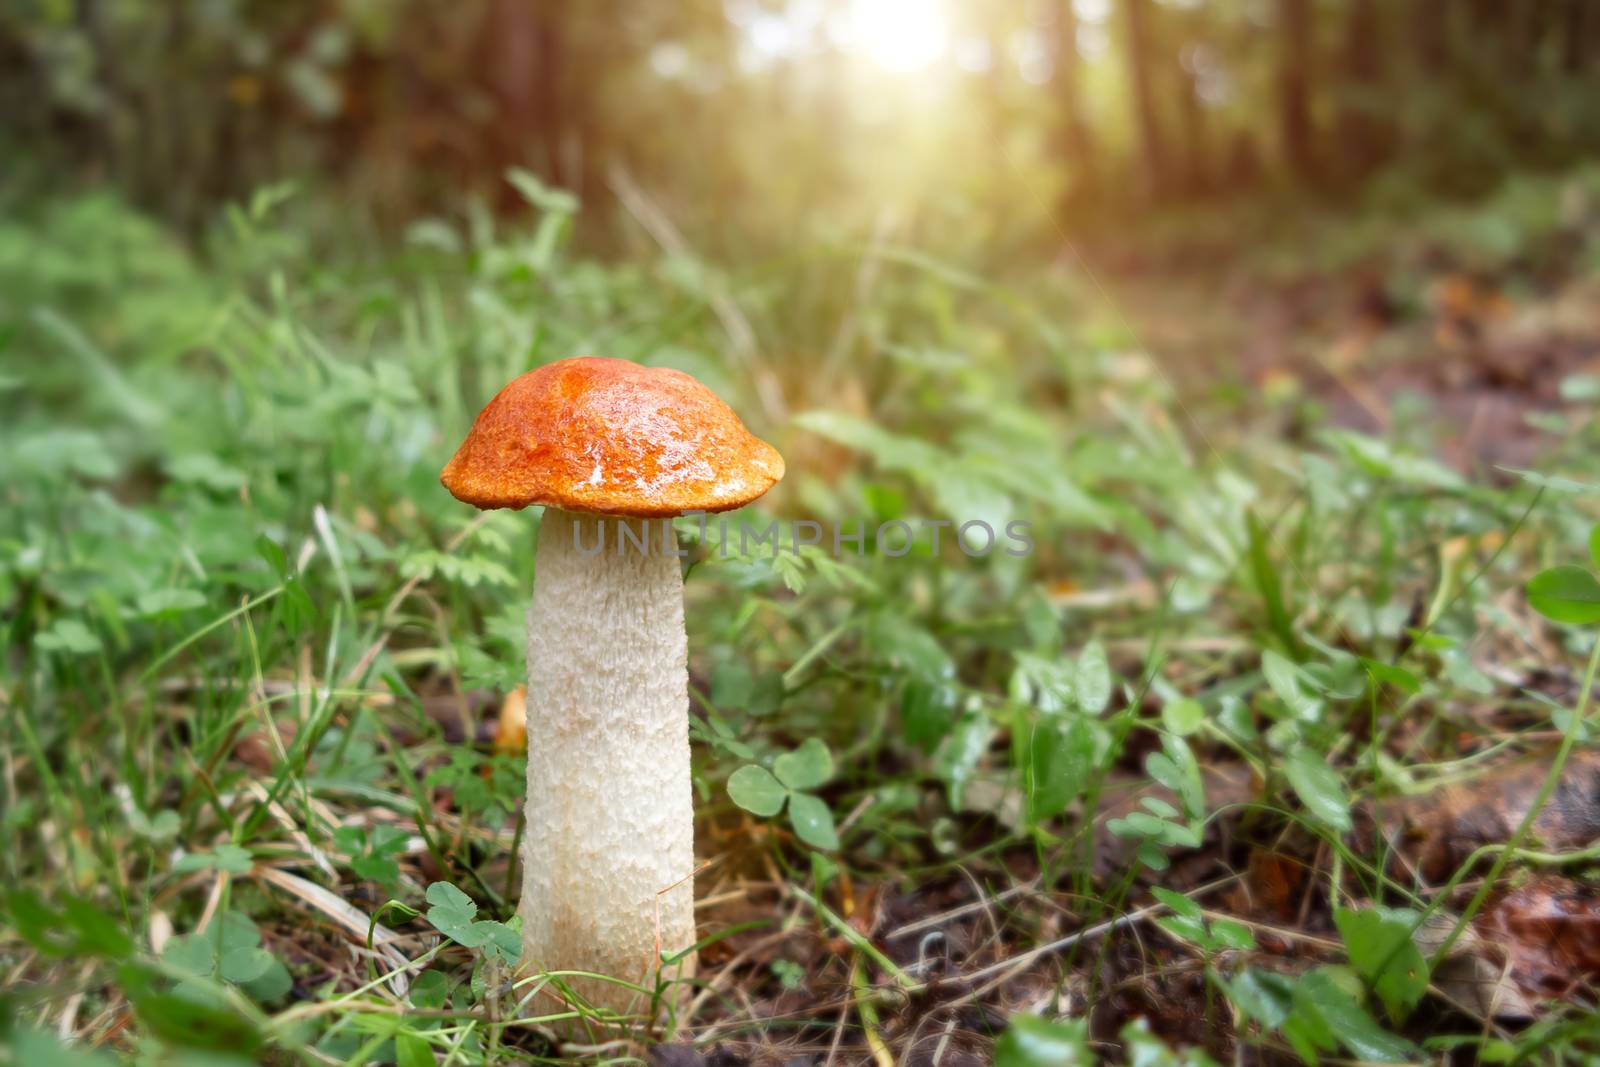 beautiful little mushroom Leccinum known as a Orange birch bolete, growing in a forest at sunrise- image by galsand